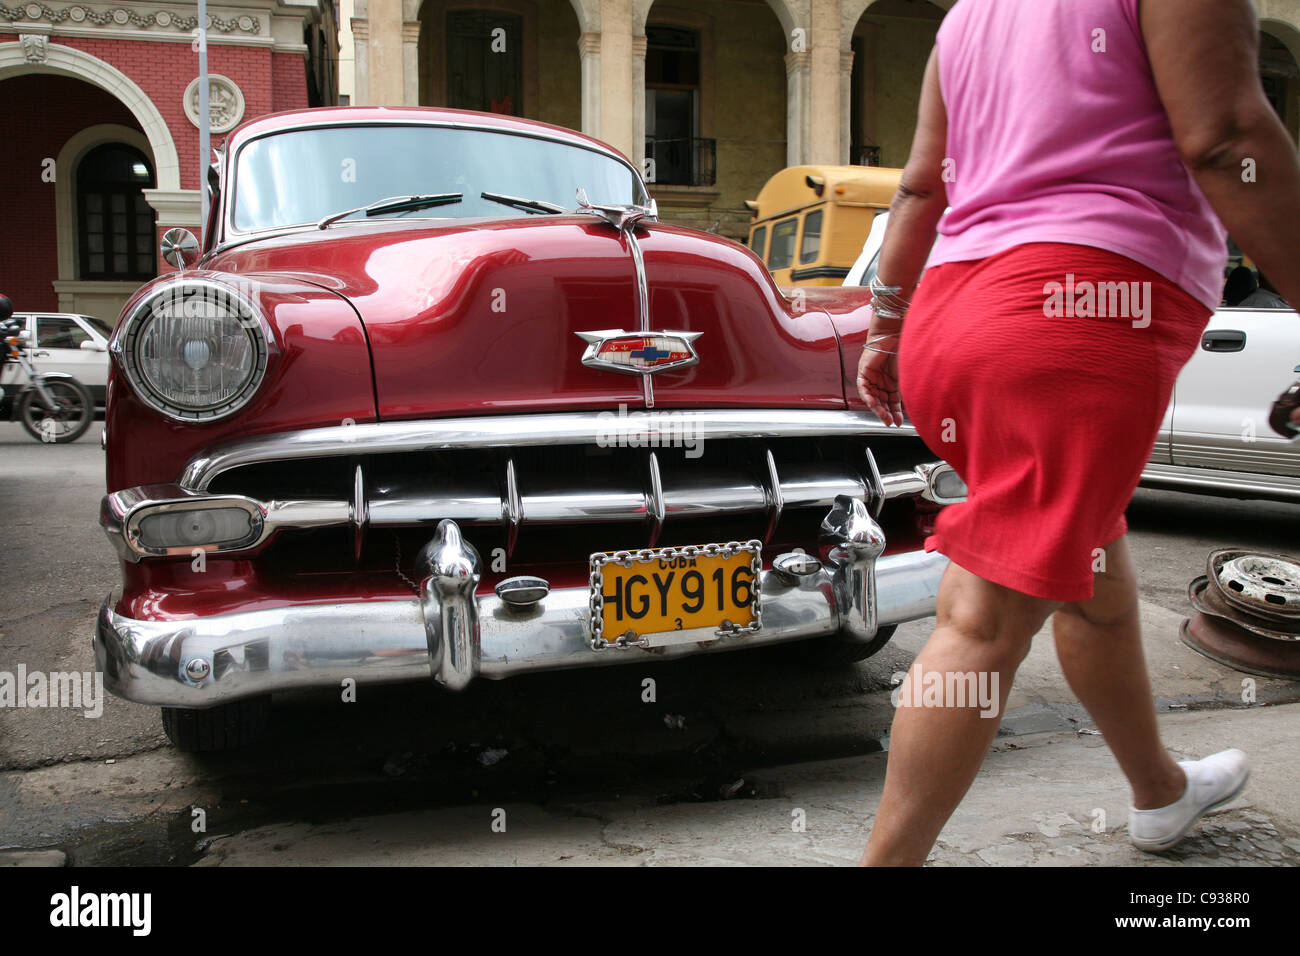 Vintage car Chevrolet parked in the historical centre of Havana, Cuba. Stock Photo